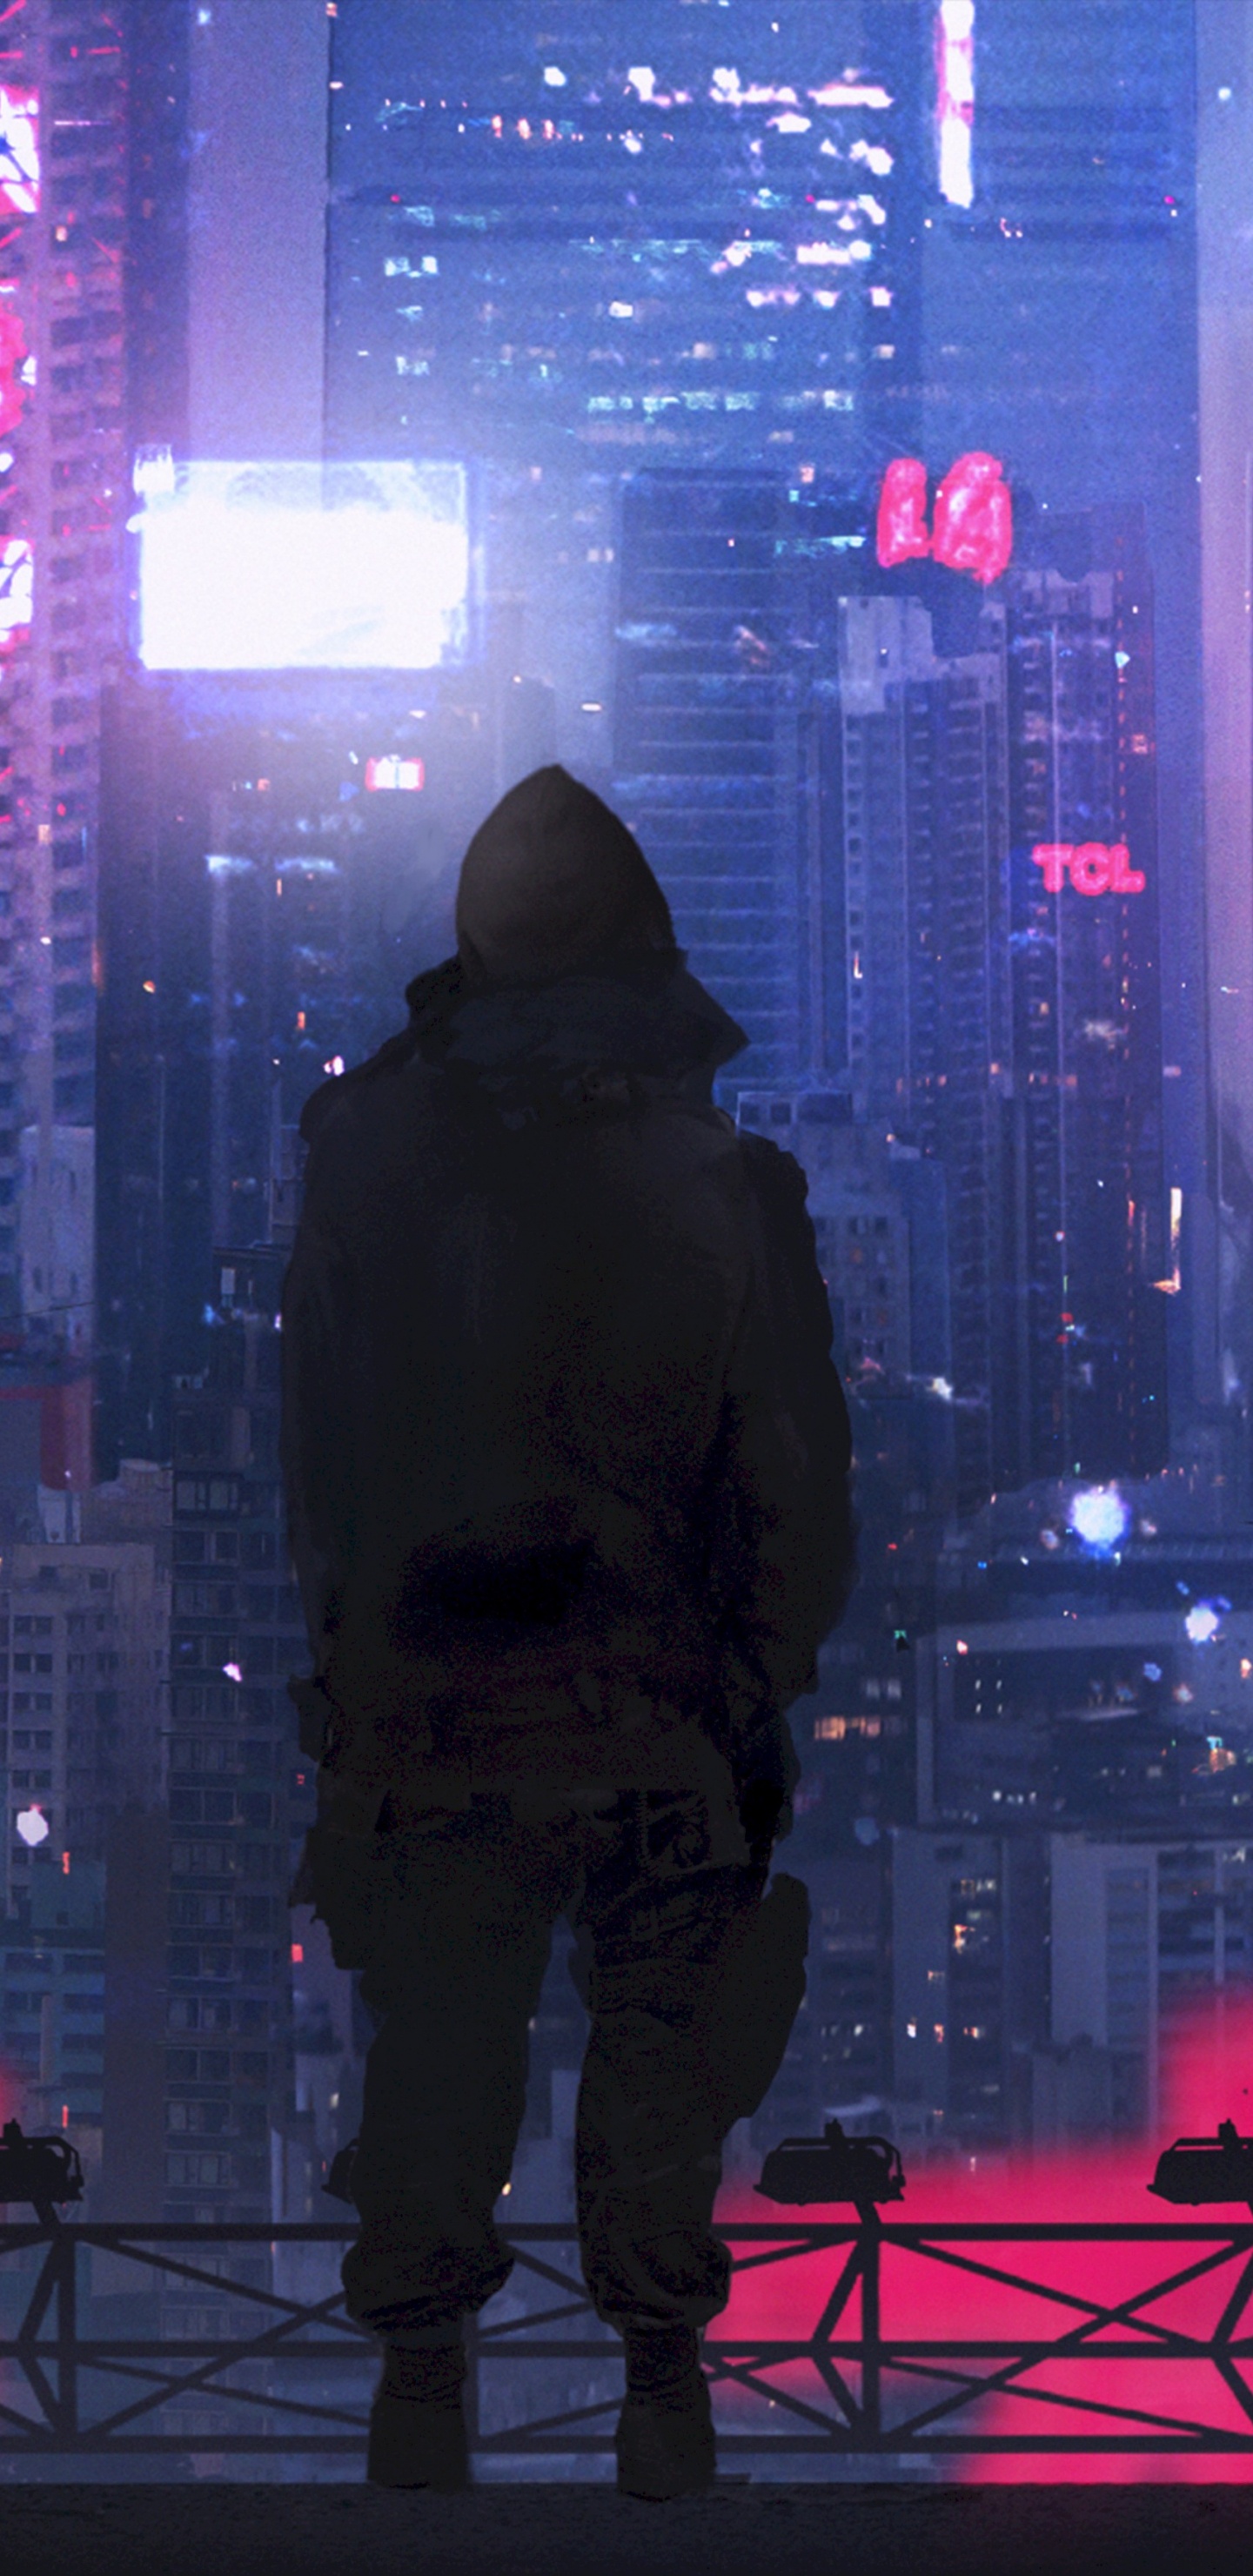 Man in Black Hoodie Standing on The Top of The Building During Night Time. Wallpaper in 1440x2960 Resolution